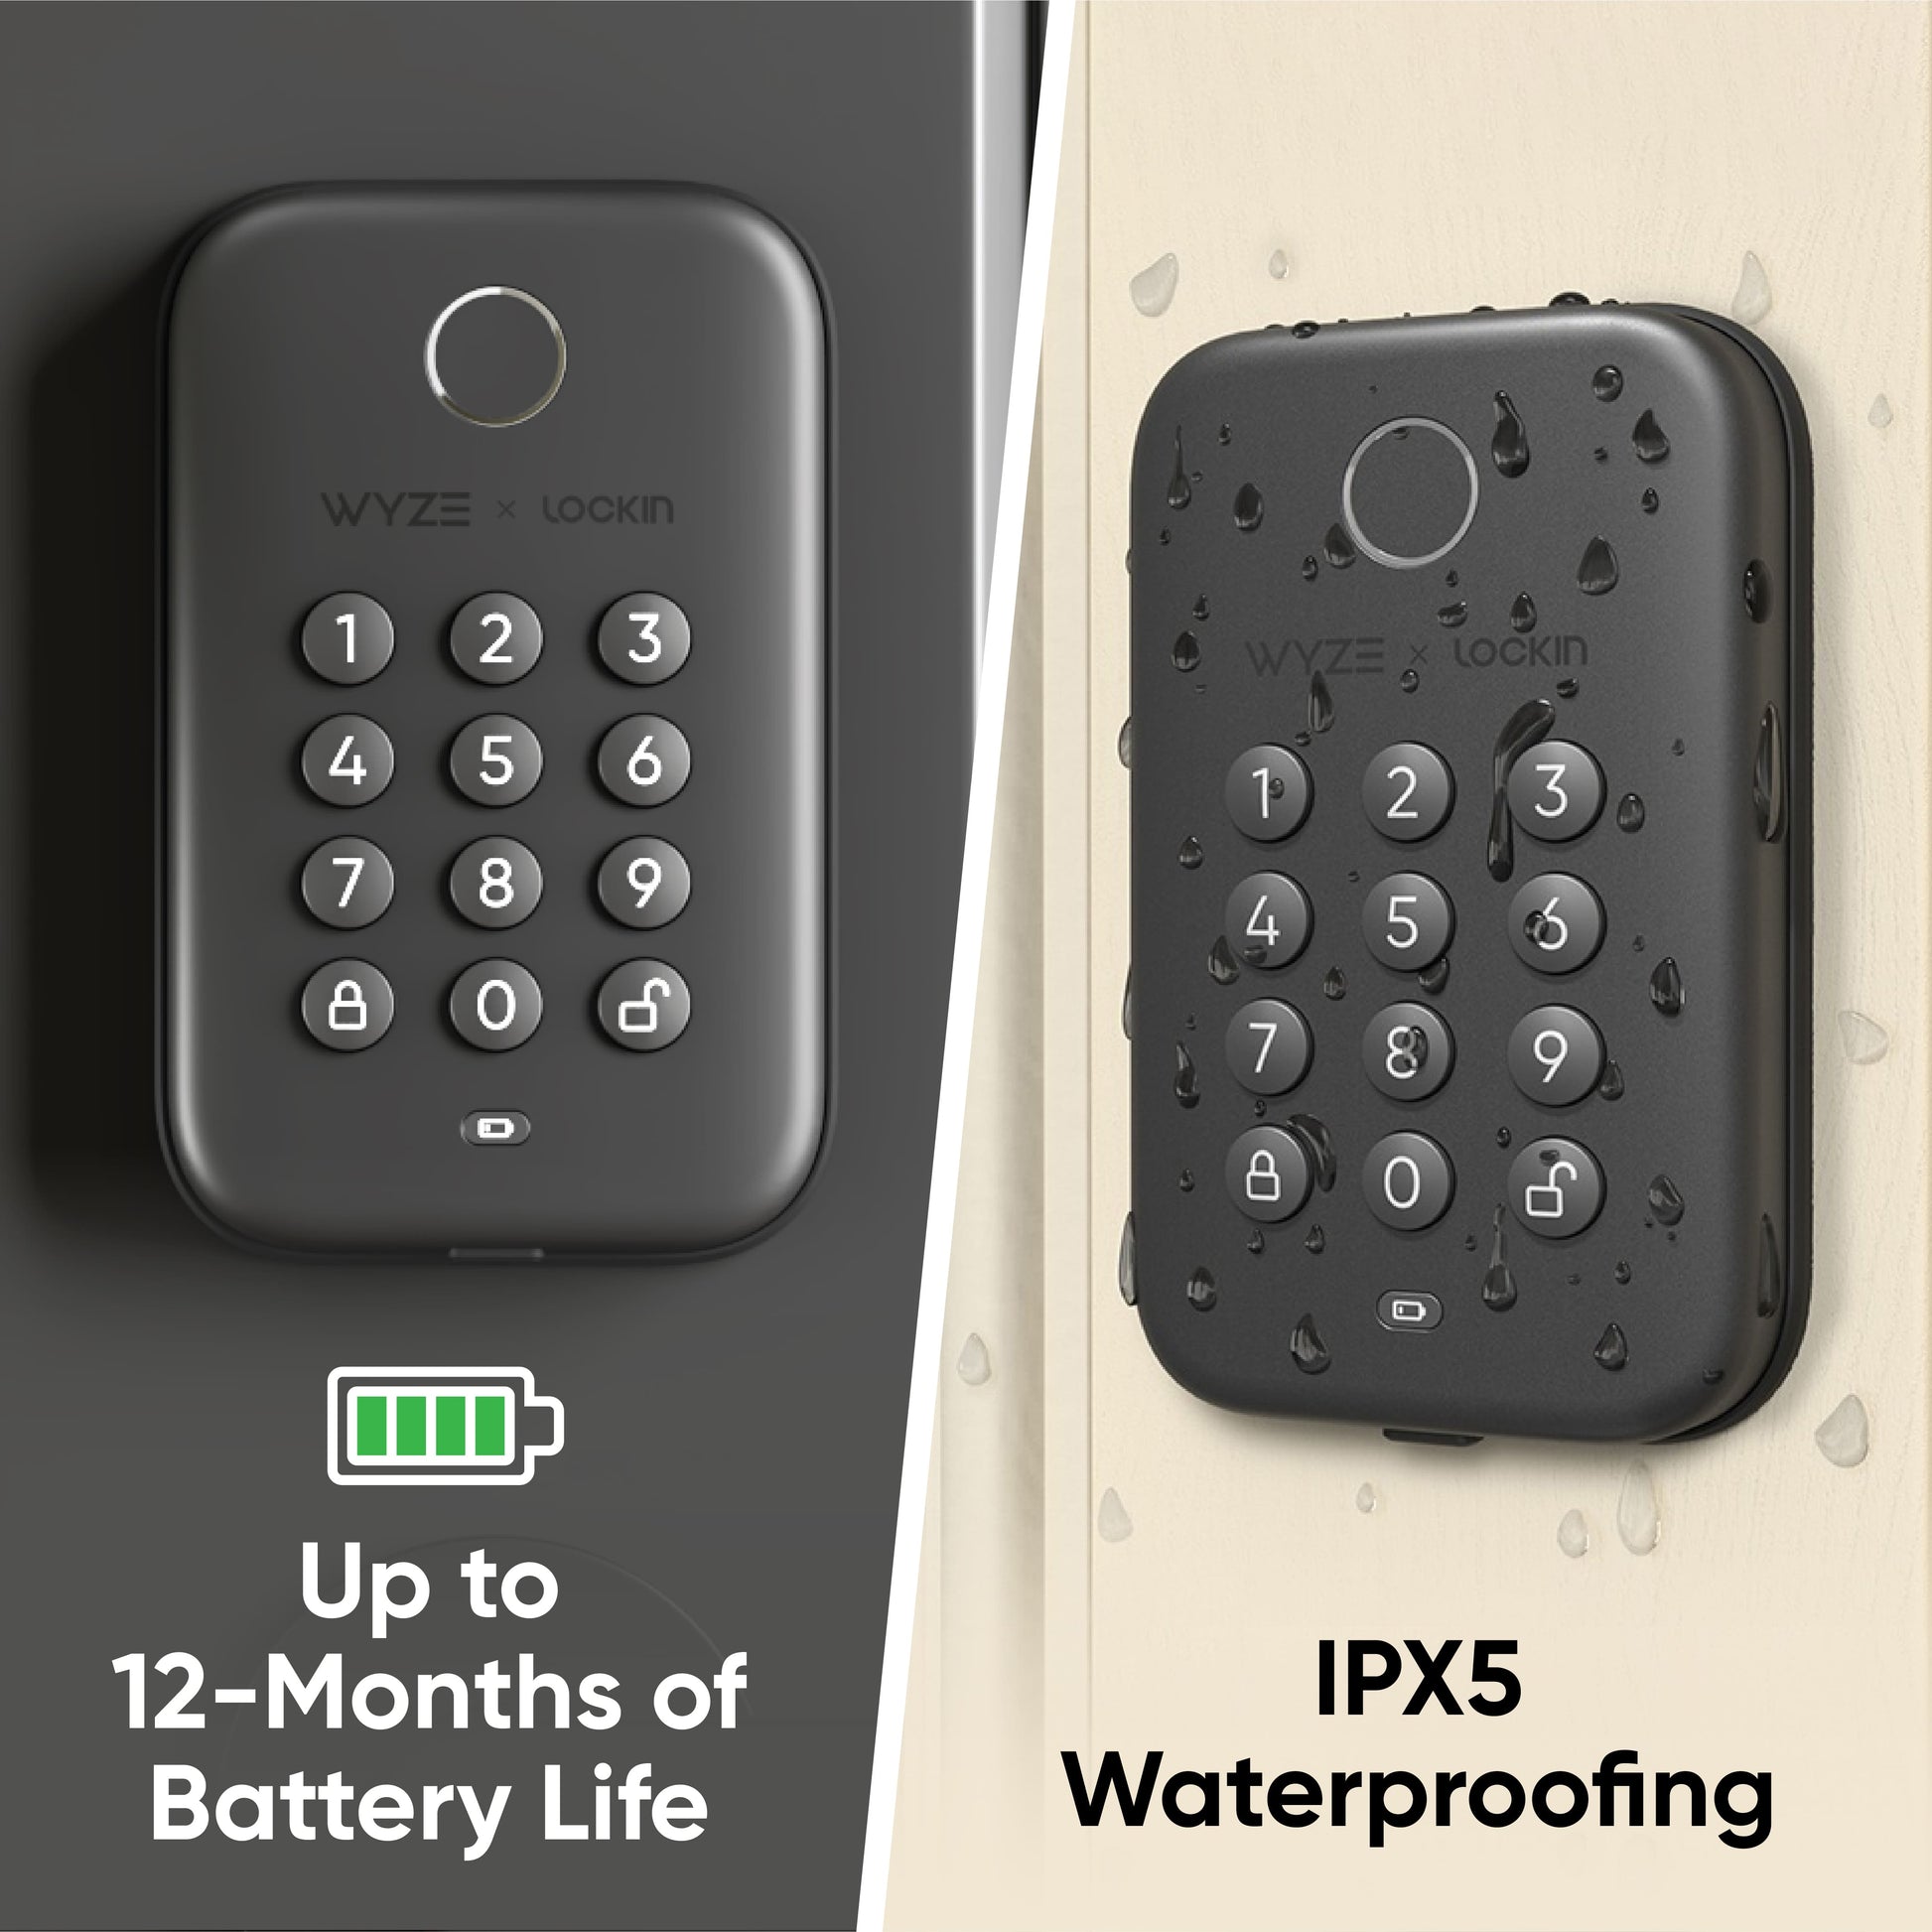 A dry Wyze Lock Bolt on the left side. A wet Wyze Lock Bolt on the right side with text that says "IPX5 Waterproofing." 